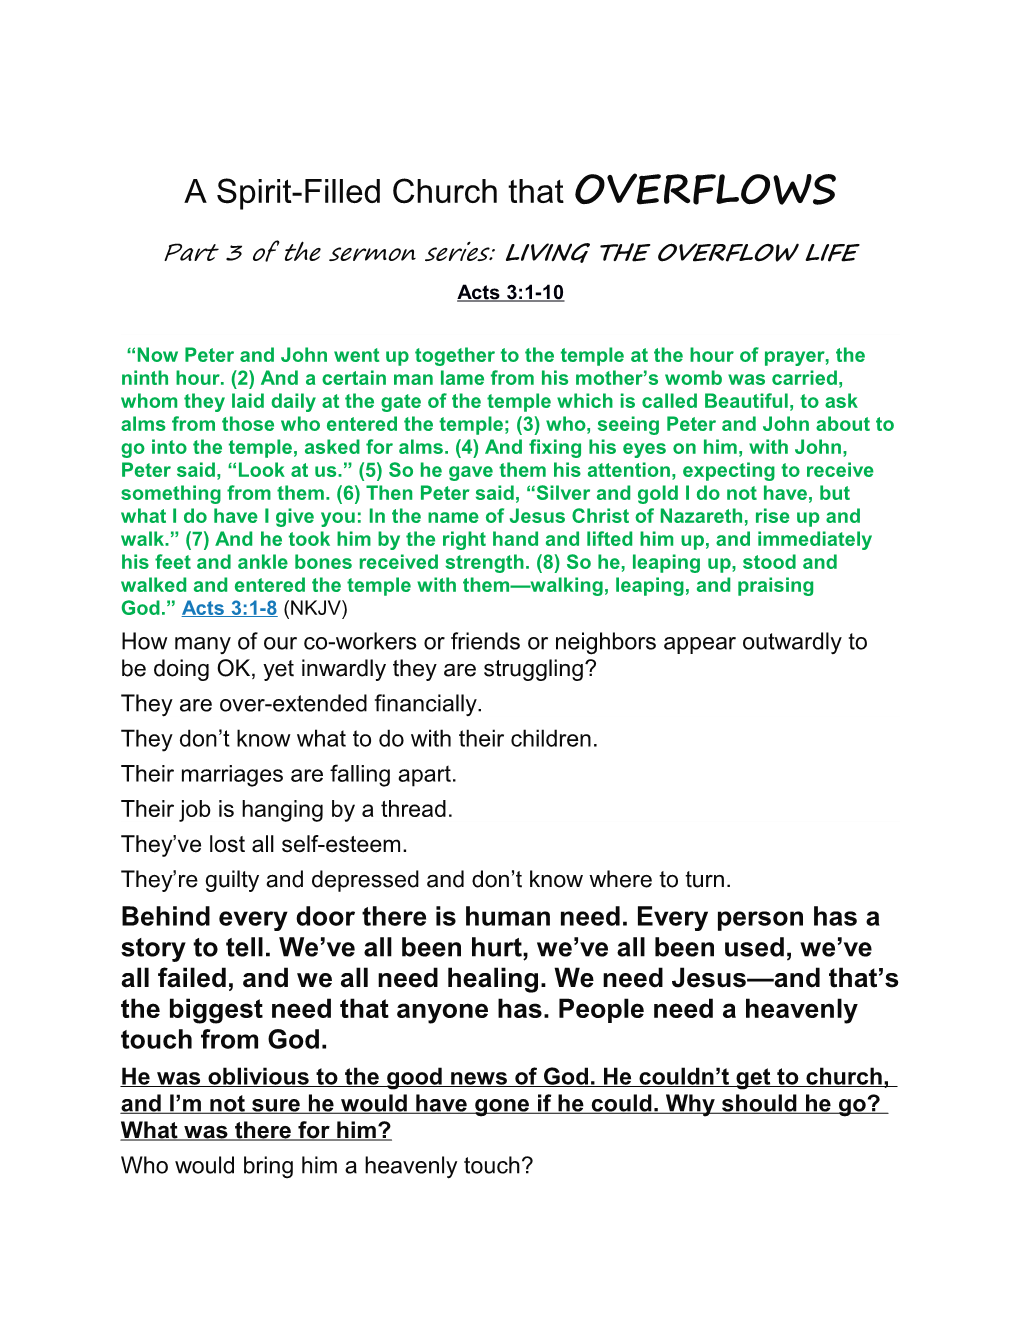 Part 3 of the Sermon Series: LIVING the OVERFLOW LIFE